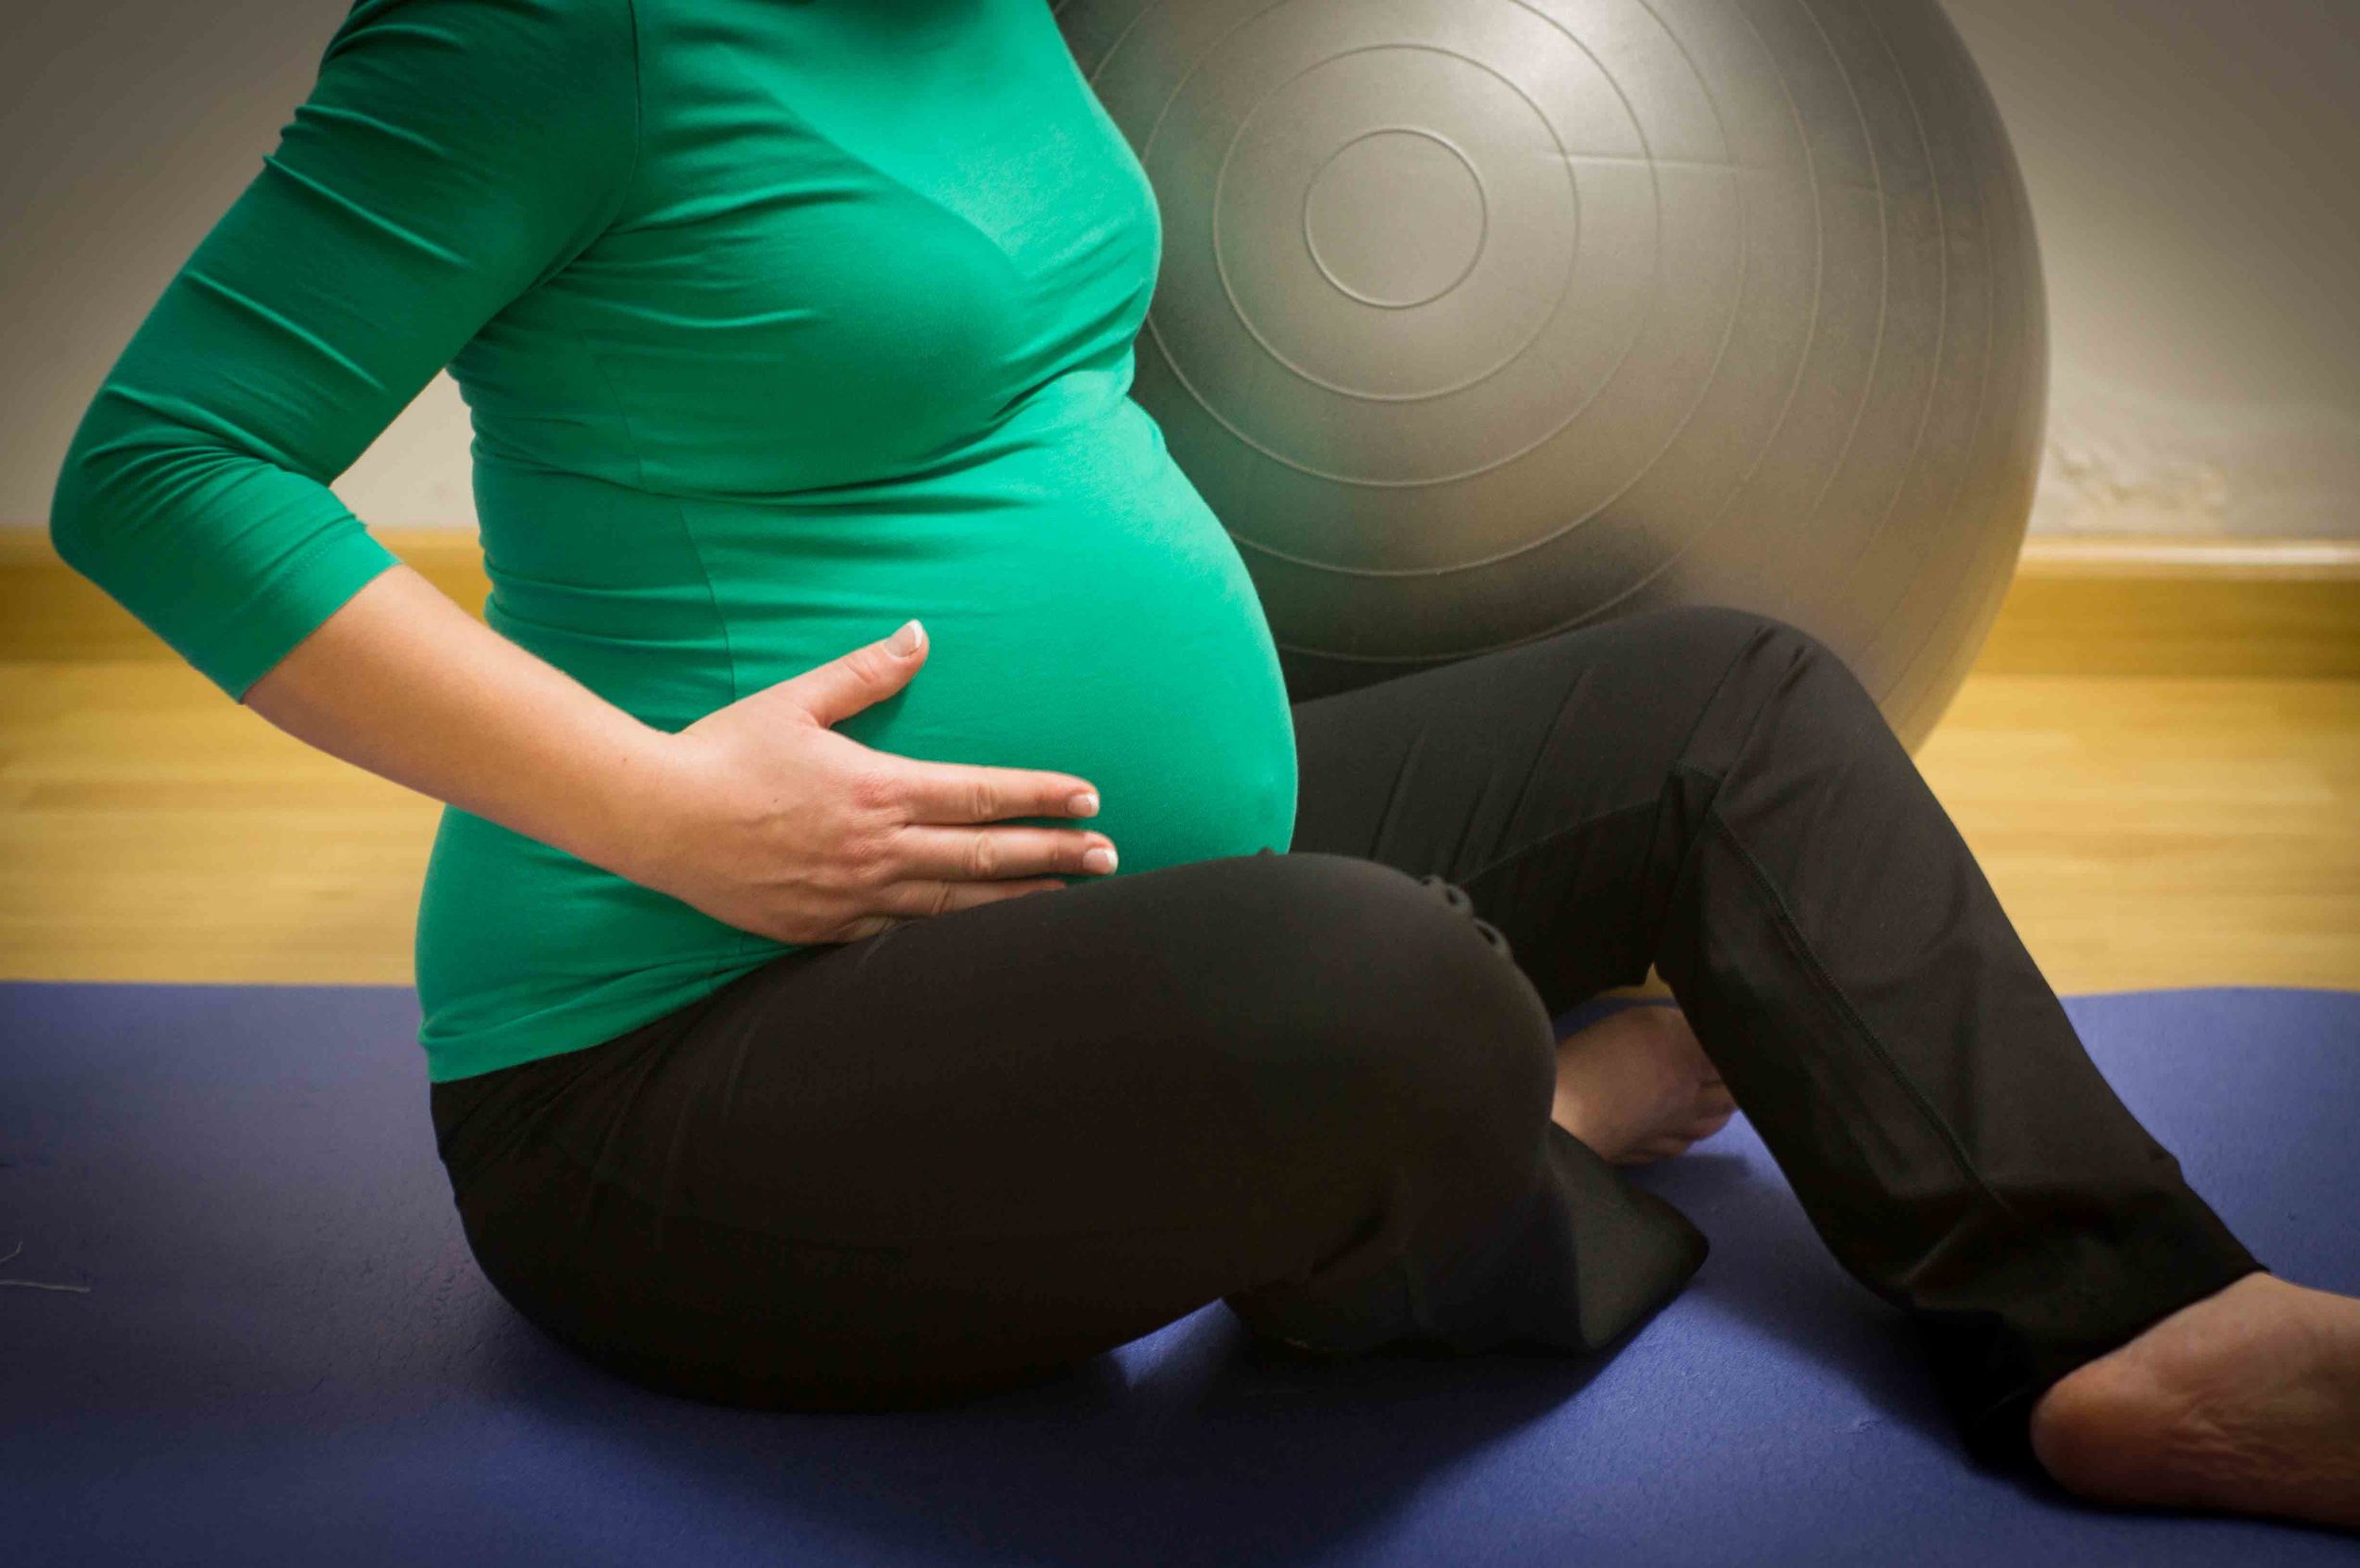 This Is Why Pilates while Pregnant Is Great for Pregnant Women